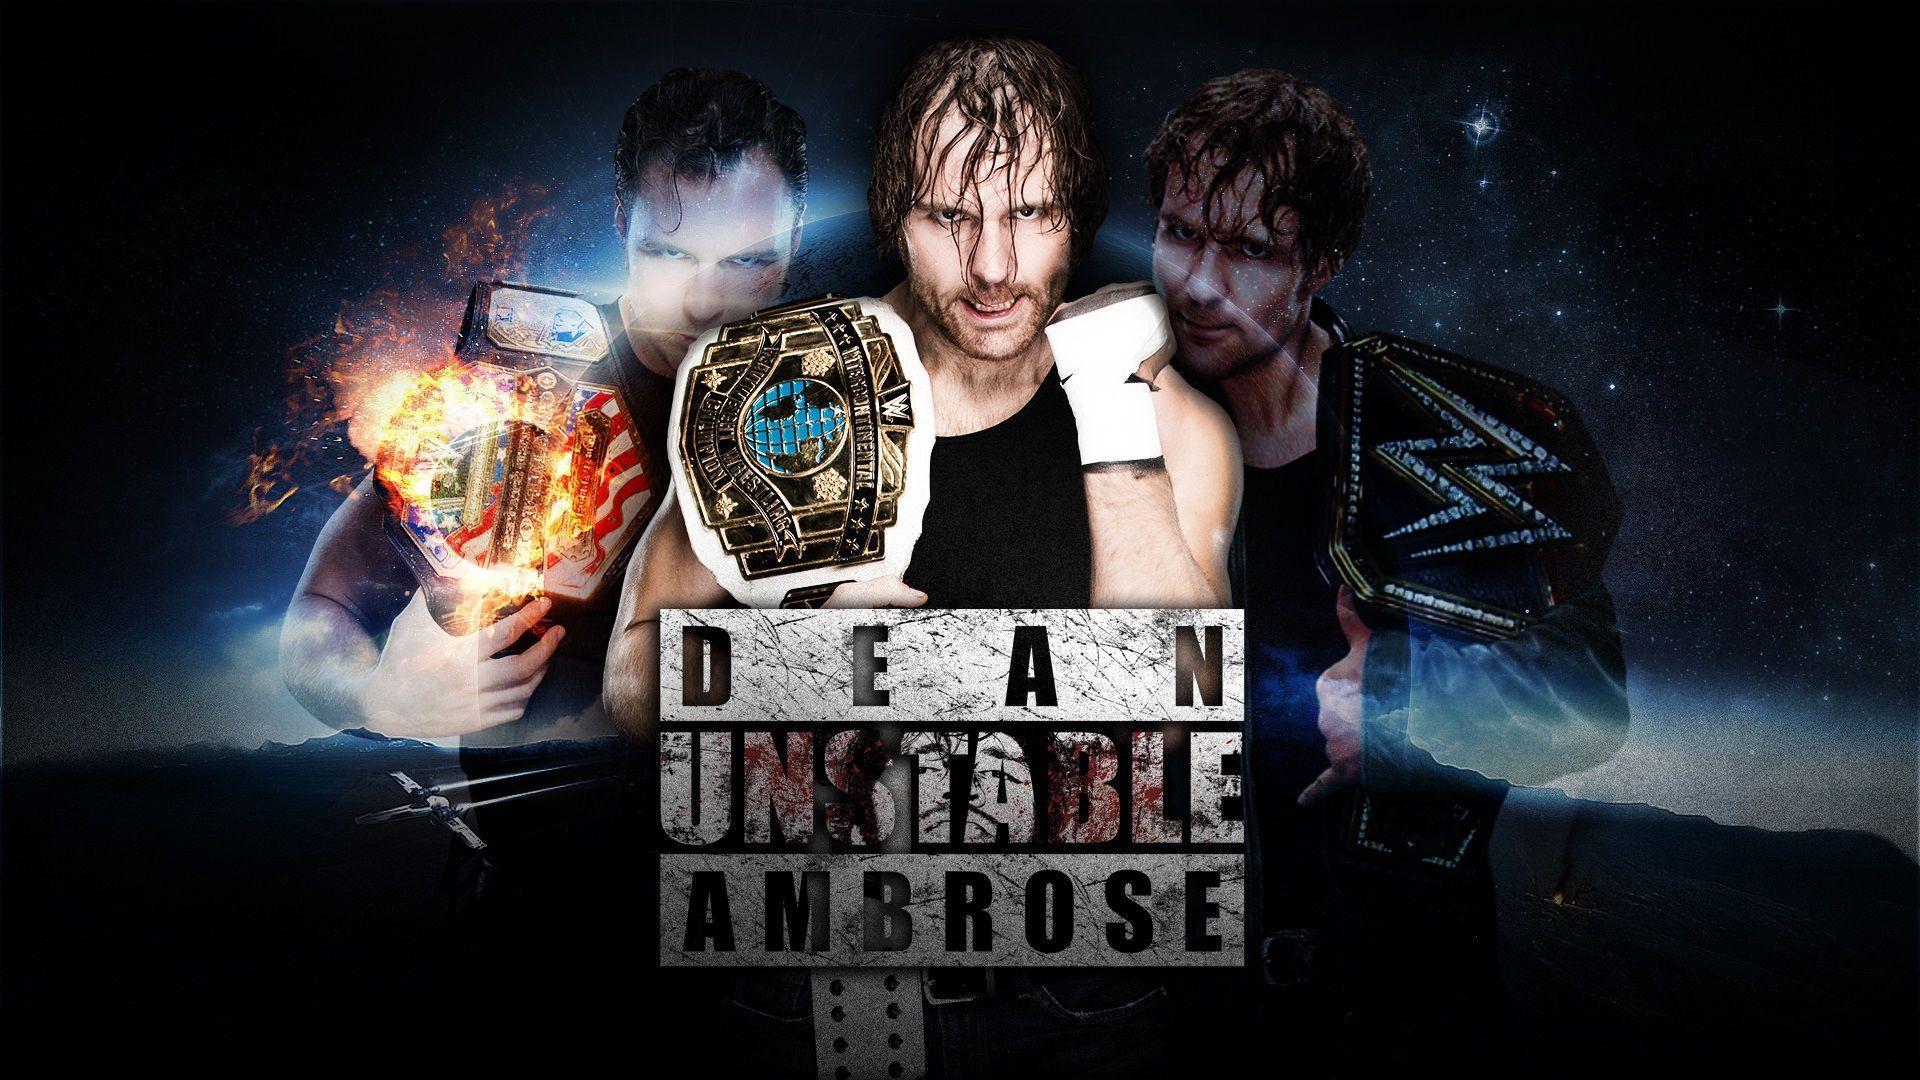 High Quality Dean Ambrose Wallpaper. One HD Wallpaper Picture